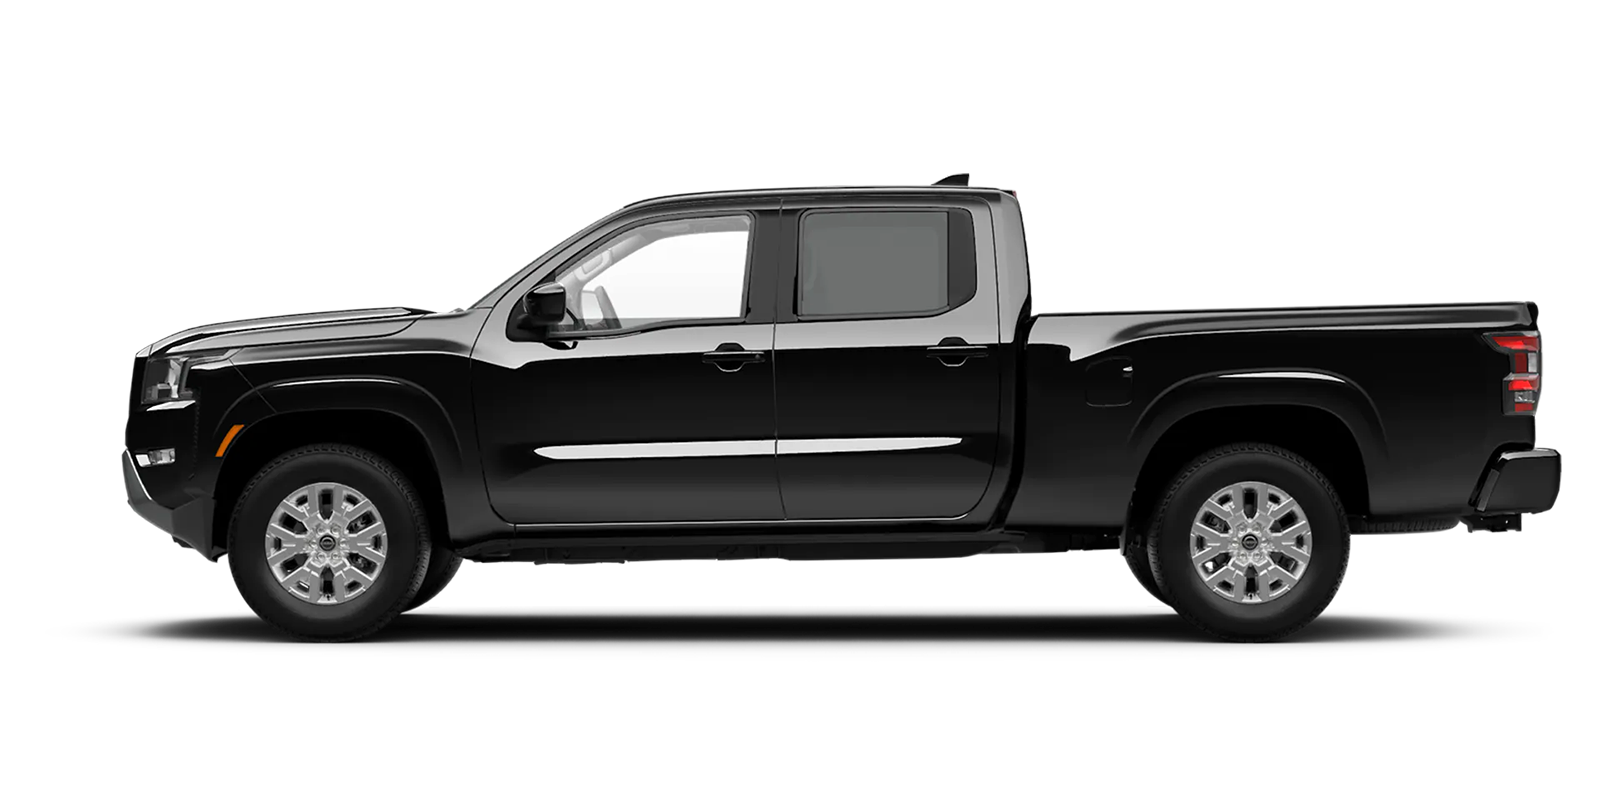 2022 Frontier Crew Cab Long Bed SV 4x2 in Super Black | Courtesy Nissan PA in Altoona PA